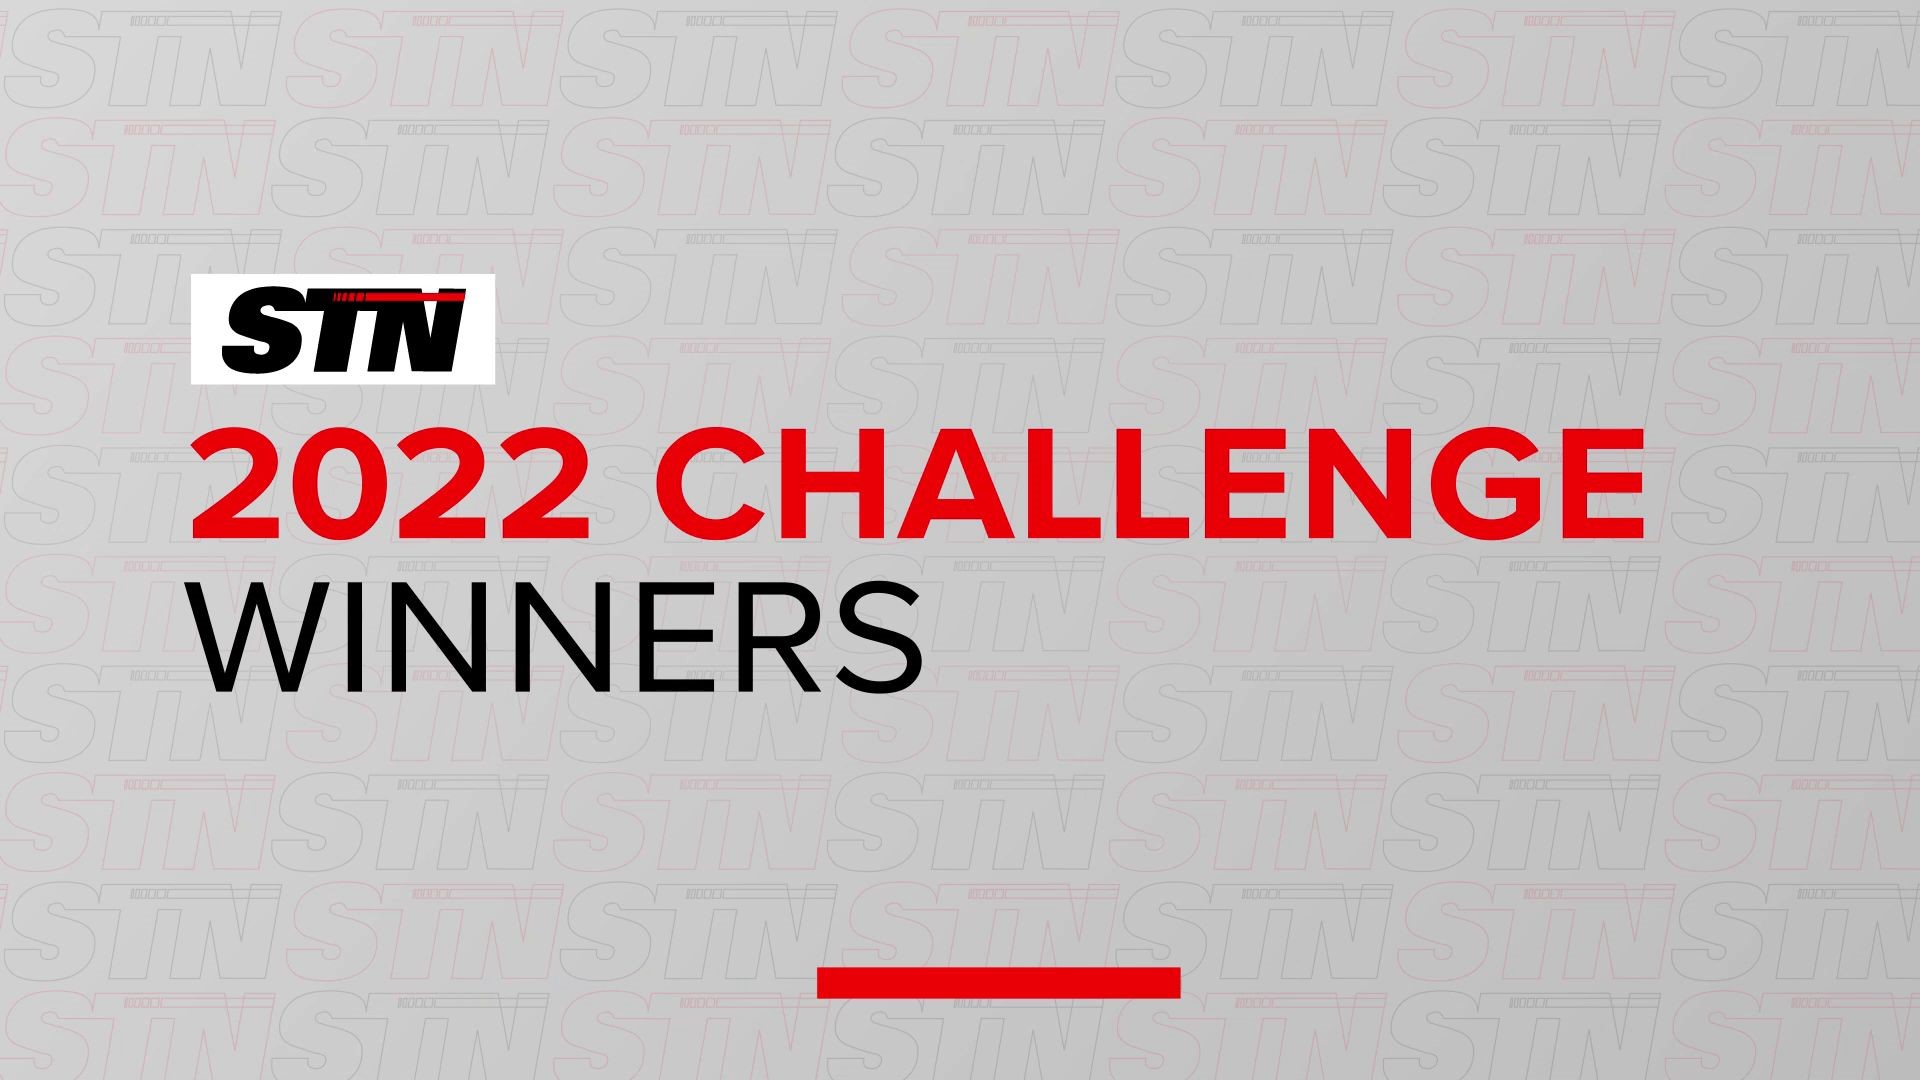 Student Television Network is a non-profit organization made up high school and middle school students from across the country. Here are the 2022 challenge winners.